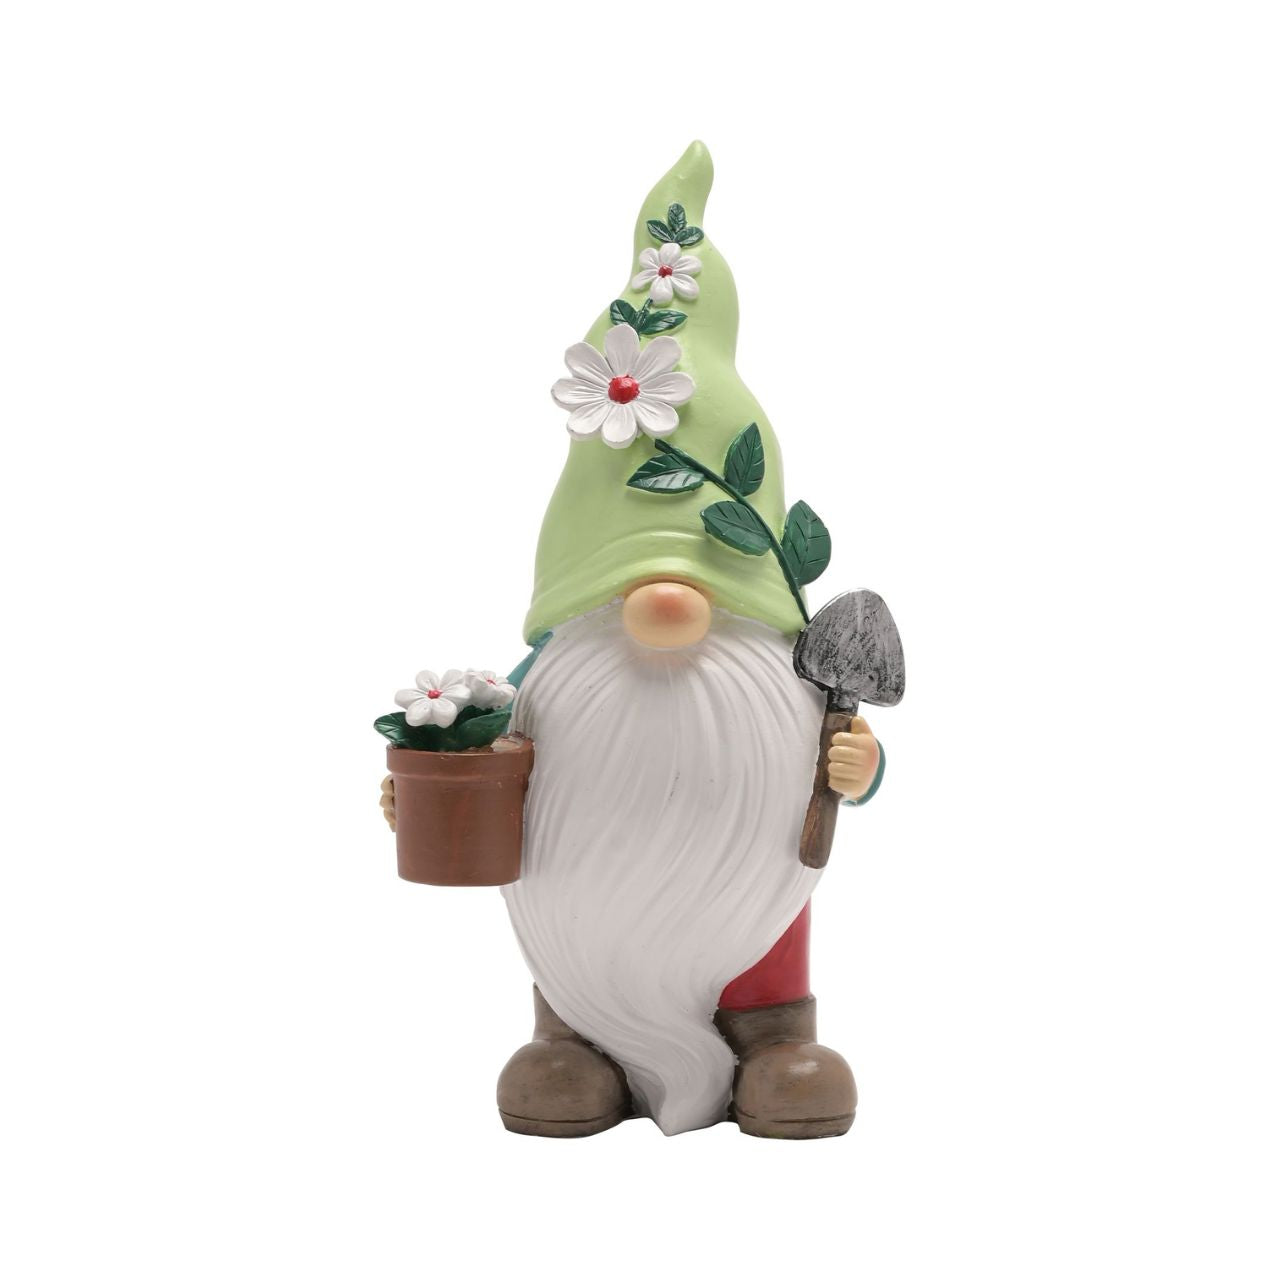 Country Living Flower Gonk With Pot Figurine  A Flower Gonk with Pot figurine by COUNTRY LIVING®.  This fun-filled decoration will raise smiles and add character to gardens.